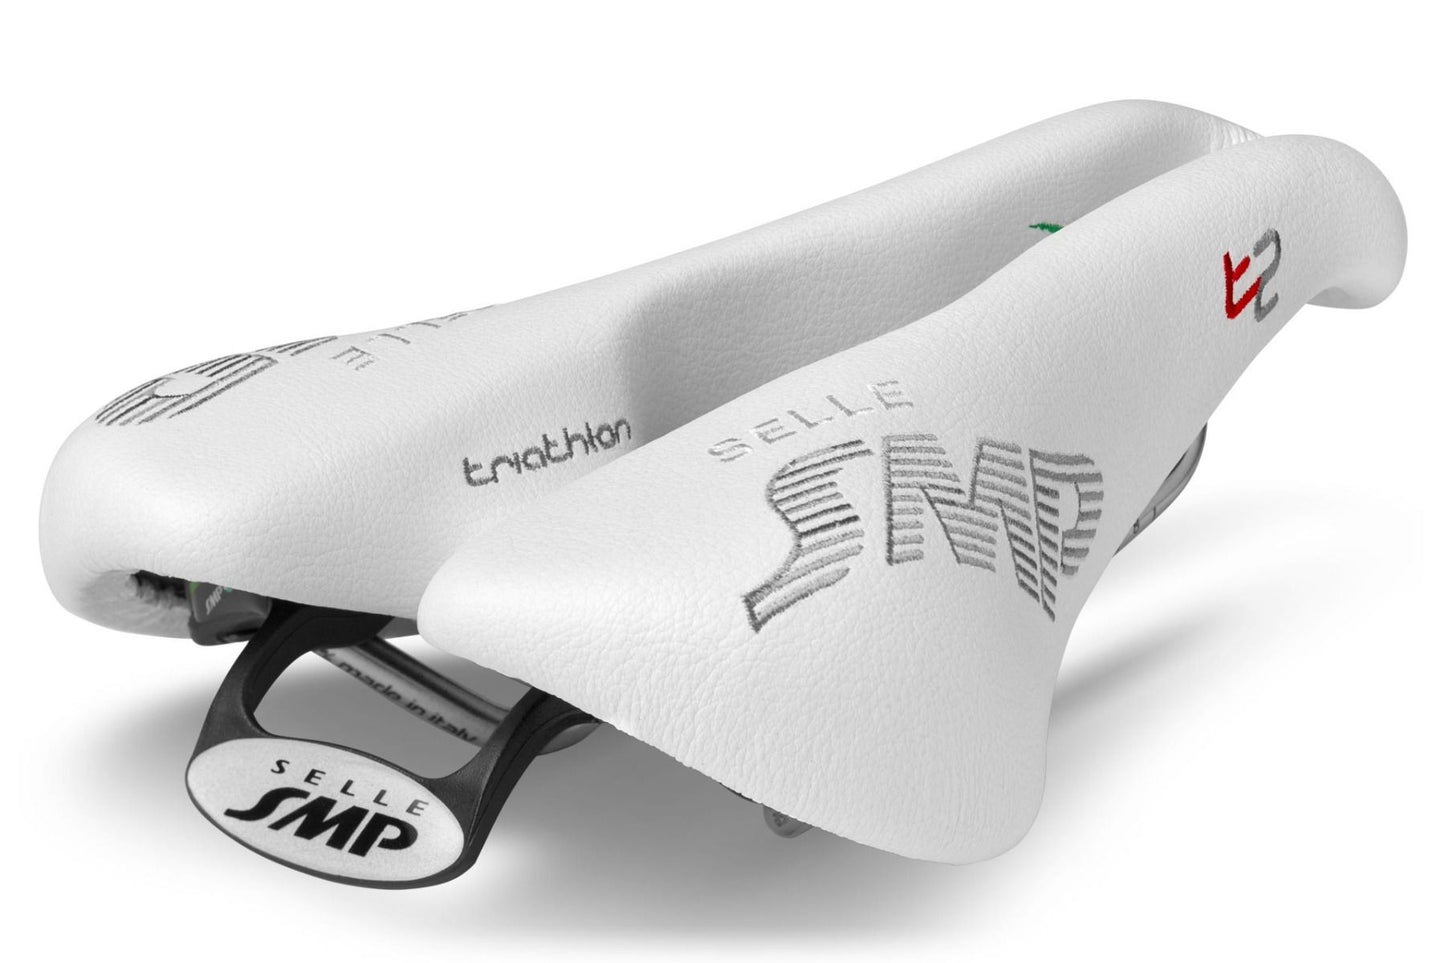 Selle SMP T2 Triathlon Saddle with Steel Rails (White)